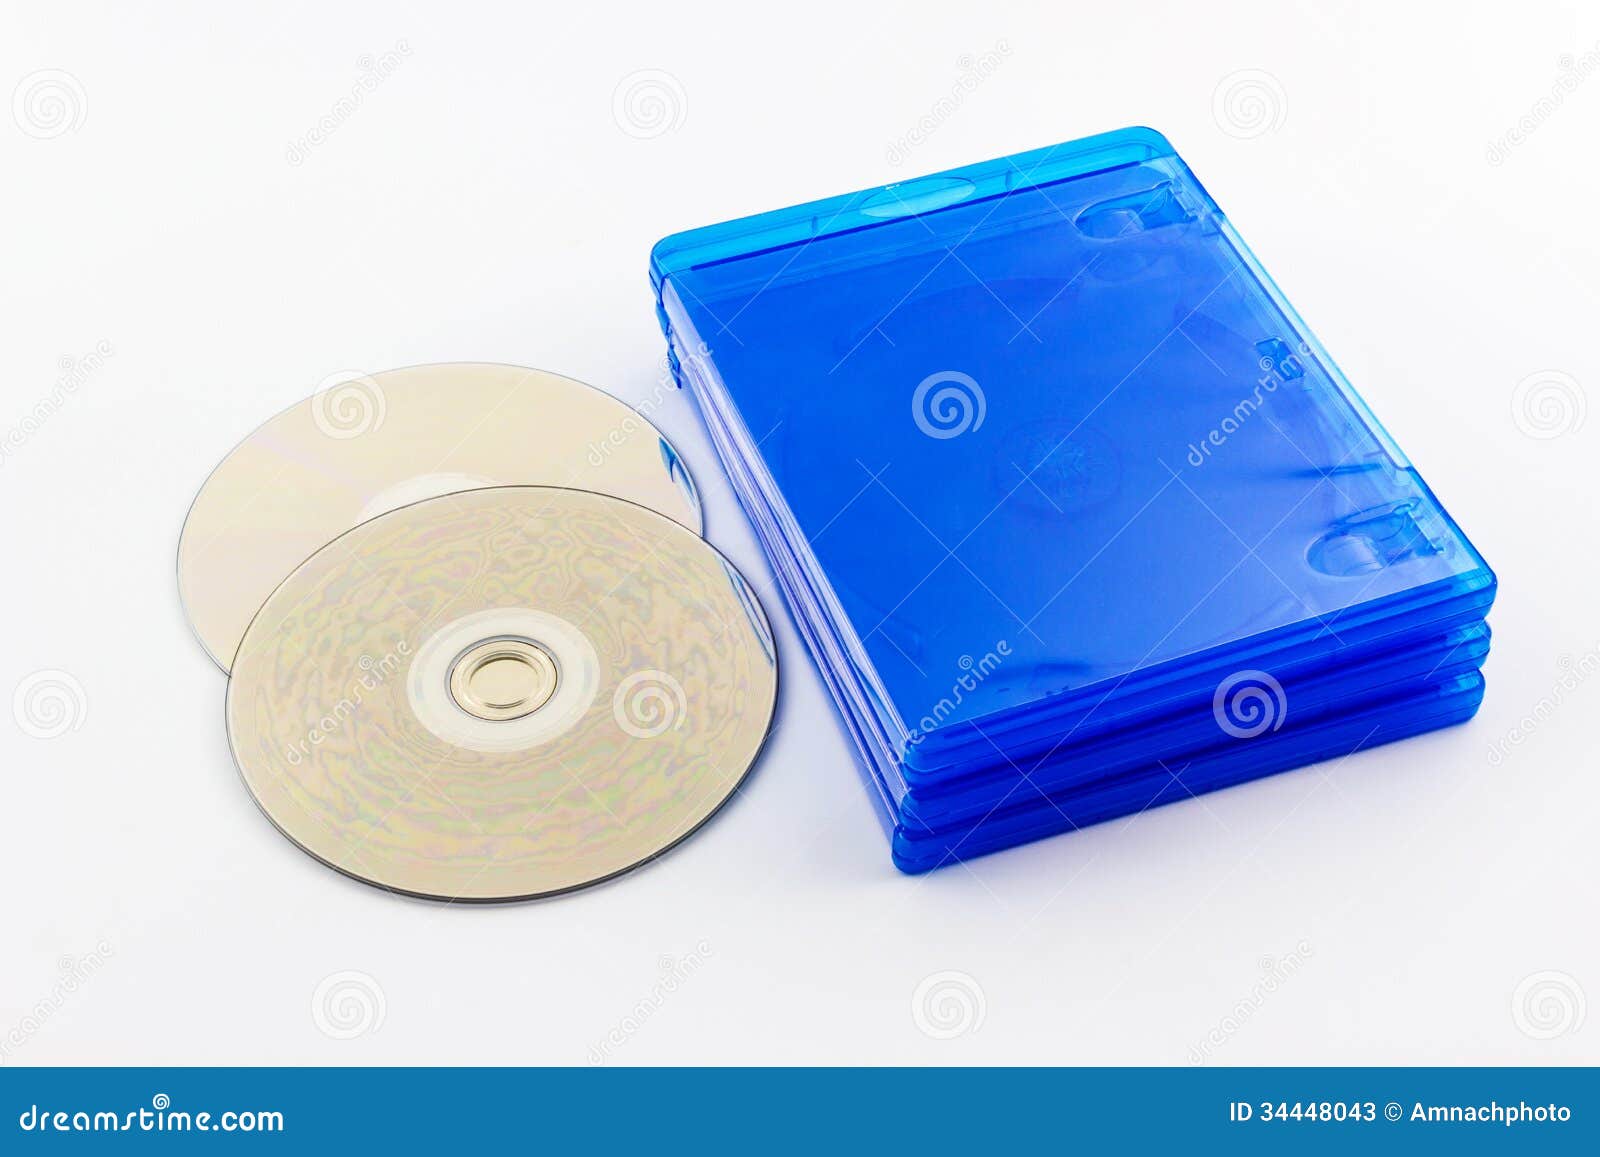 Blu Ray Disc Boxes and Blu Ray Disc. Stock Image - Image of bluray